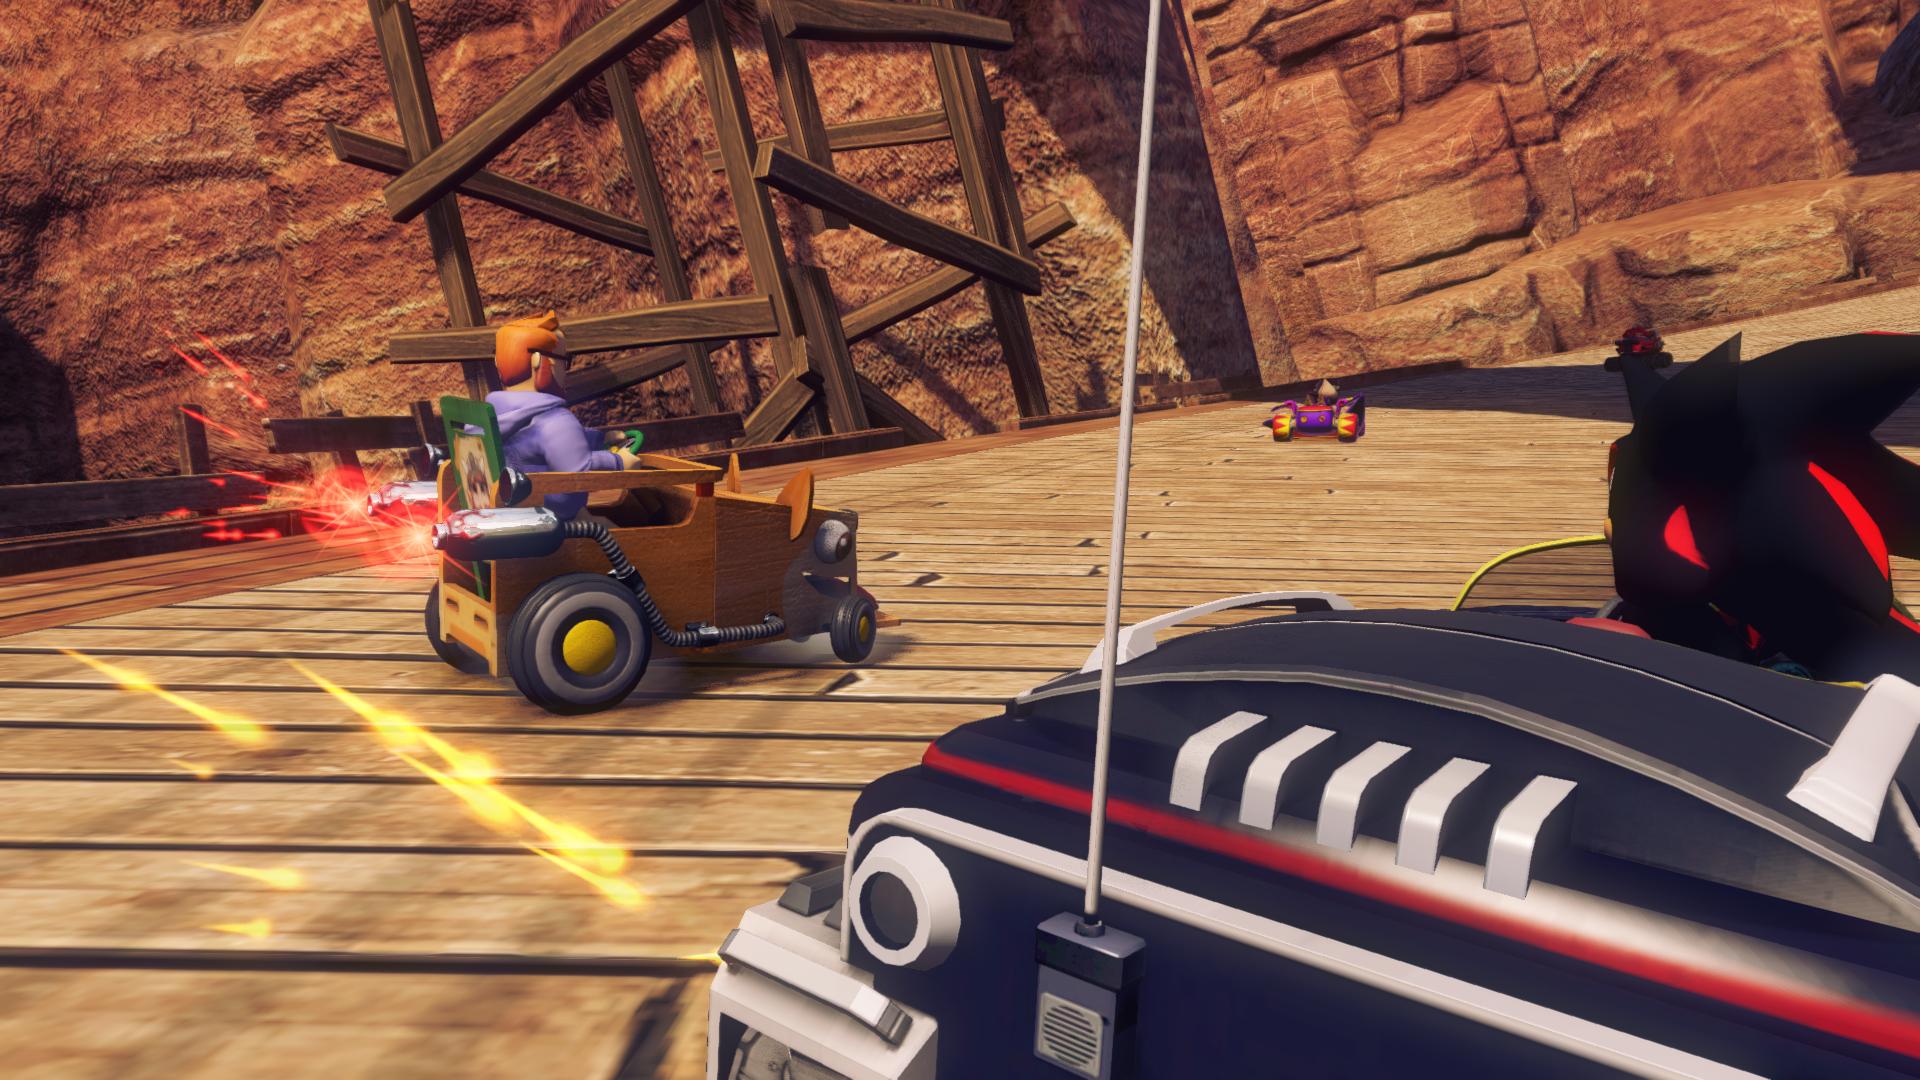 (51.92$) Sonic and All-Stars Racing Transformed - Yogscast DLC Steam Gift